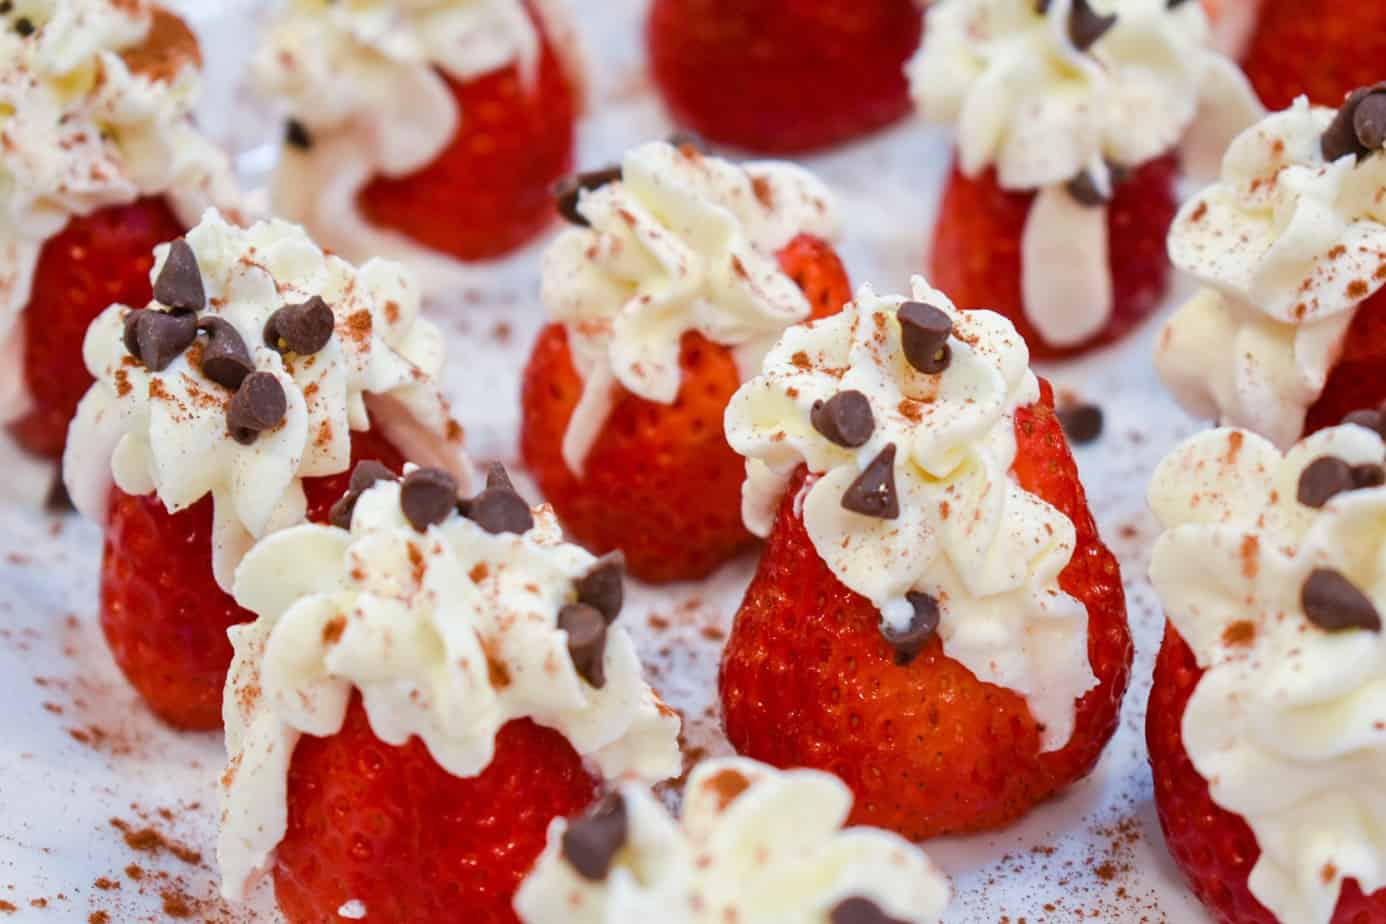 strawberries filled with cannoli cream and topped with choco chips